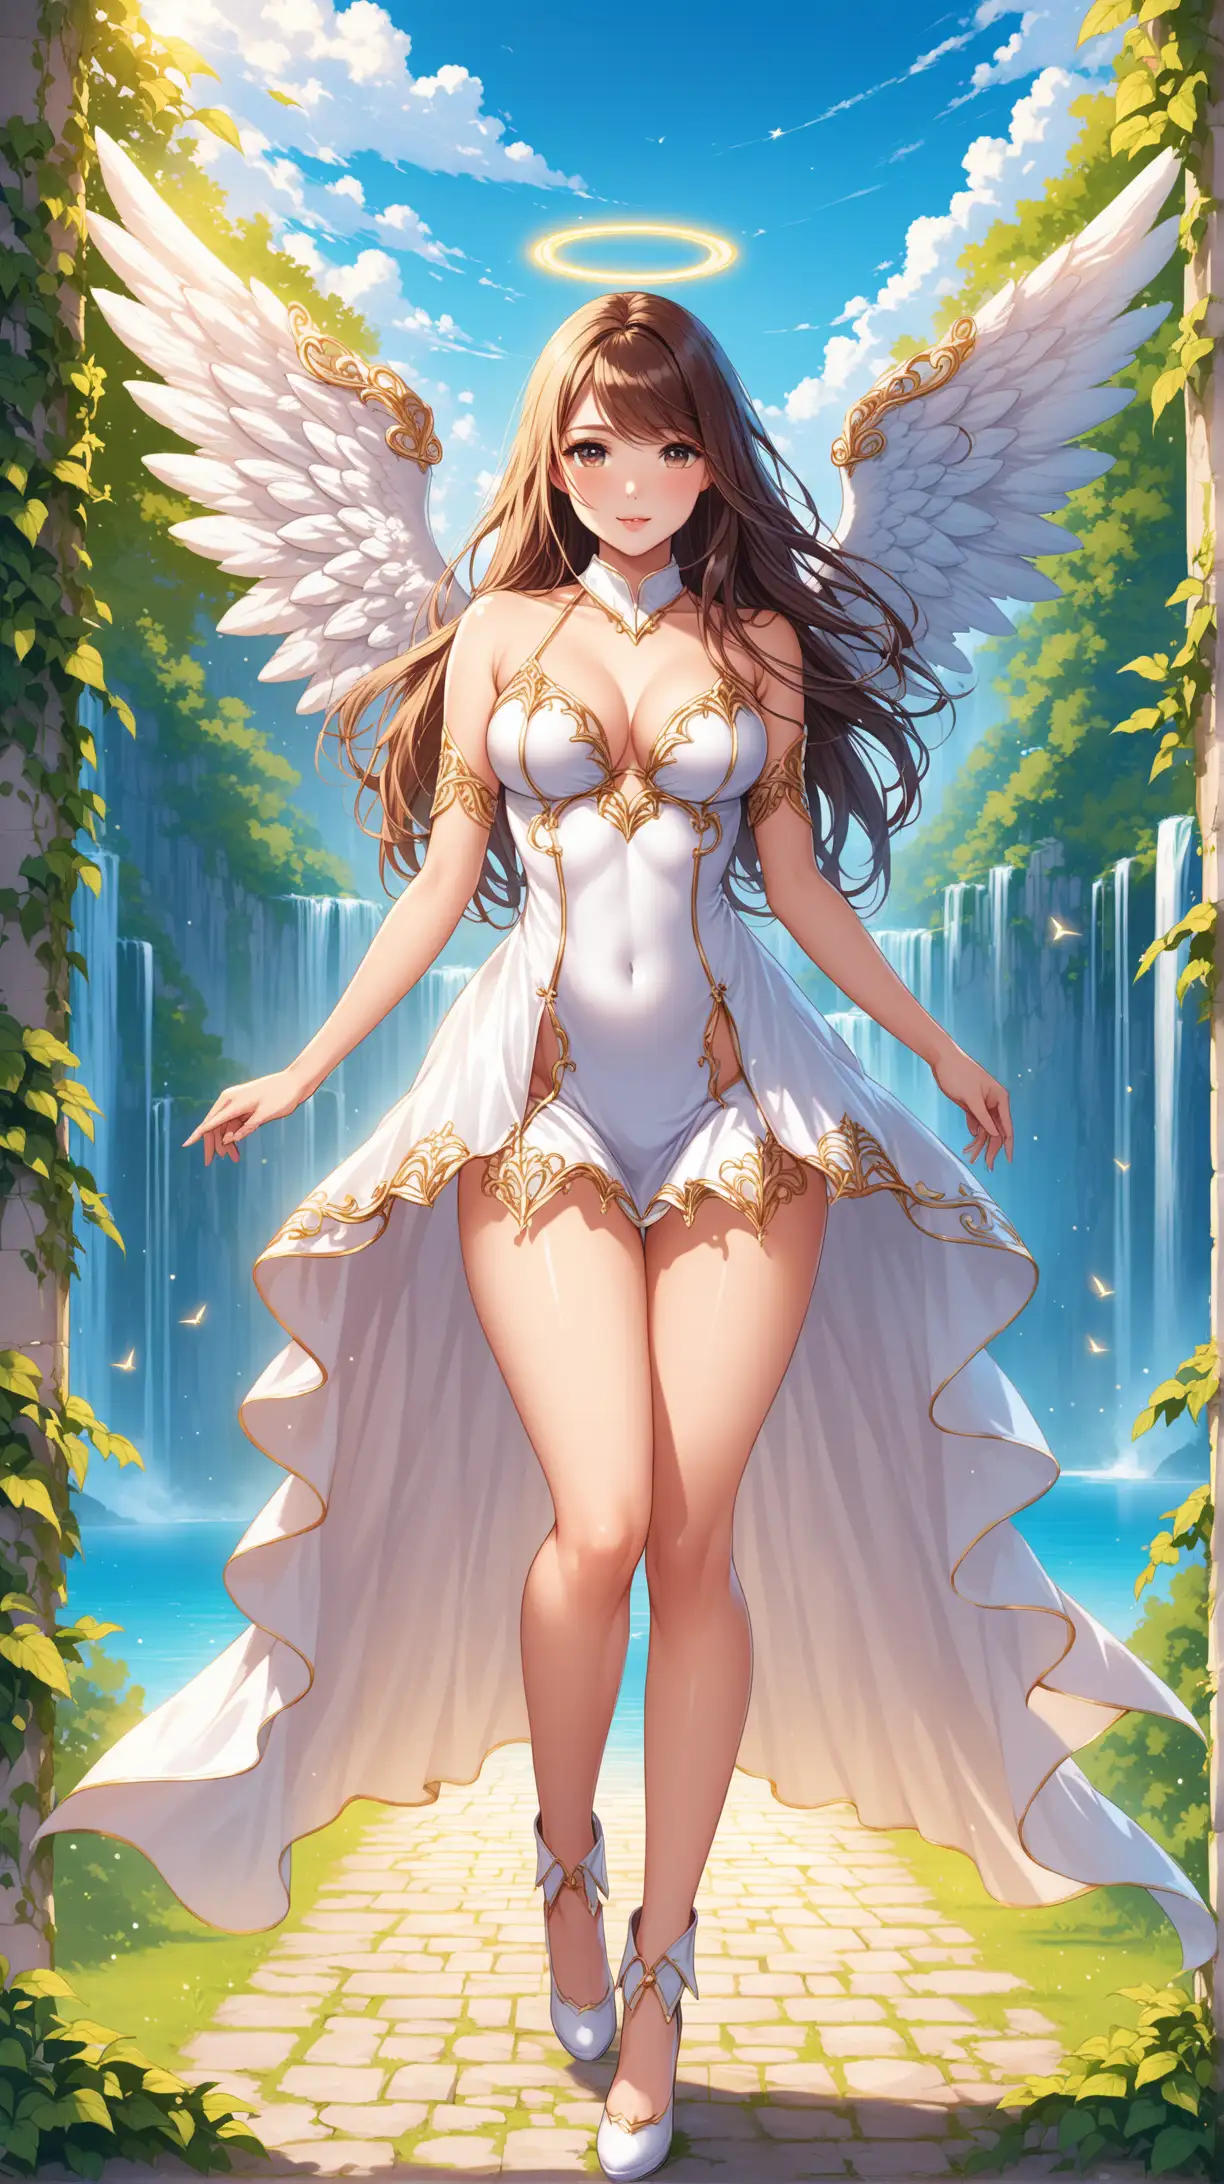 Sensual Angel in Short Dress with Flowing Hair in a Fantastical Setting